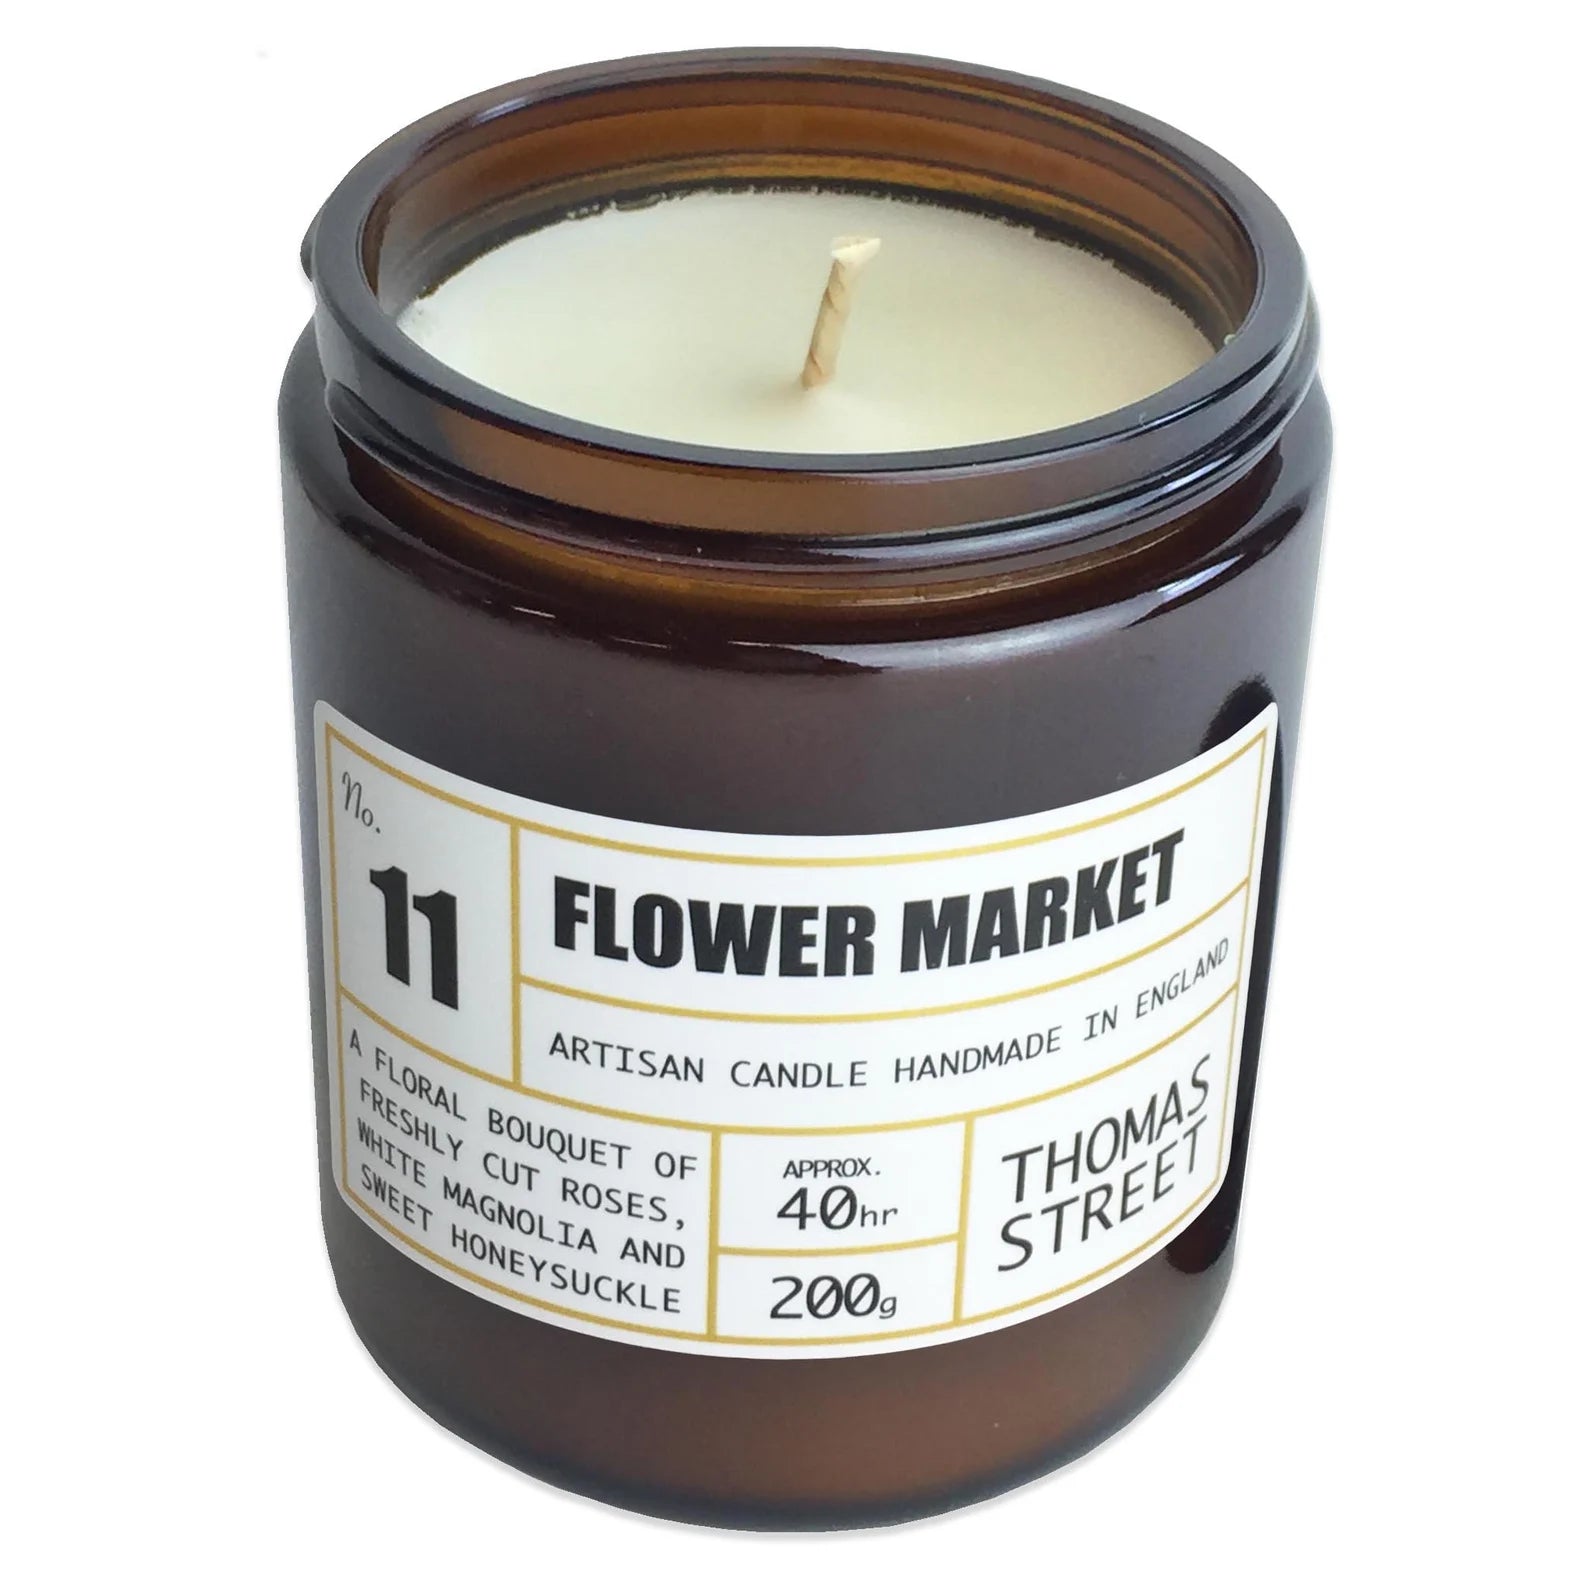 Thomas Street Flower Market Soy Wax Scented Candle 200g